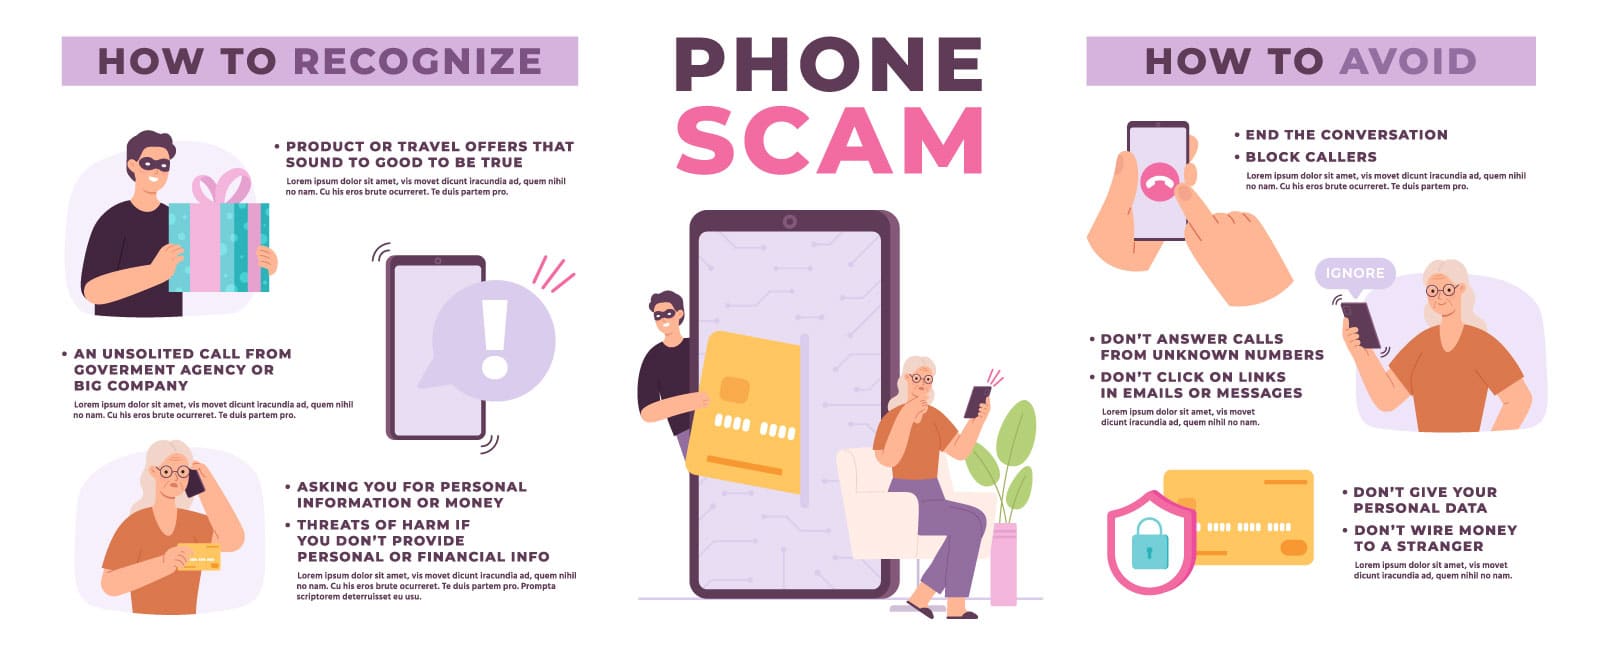 phone call scam infographic